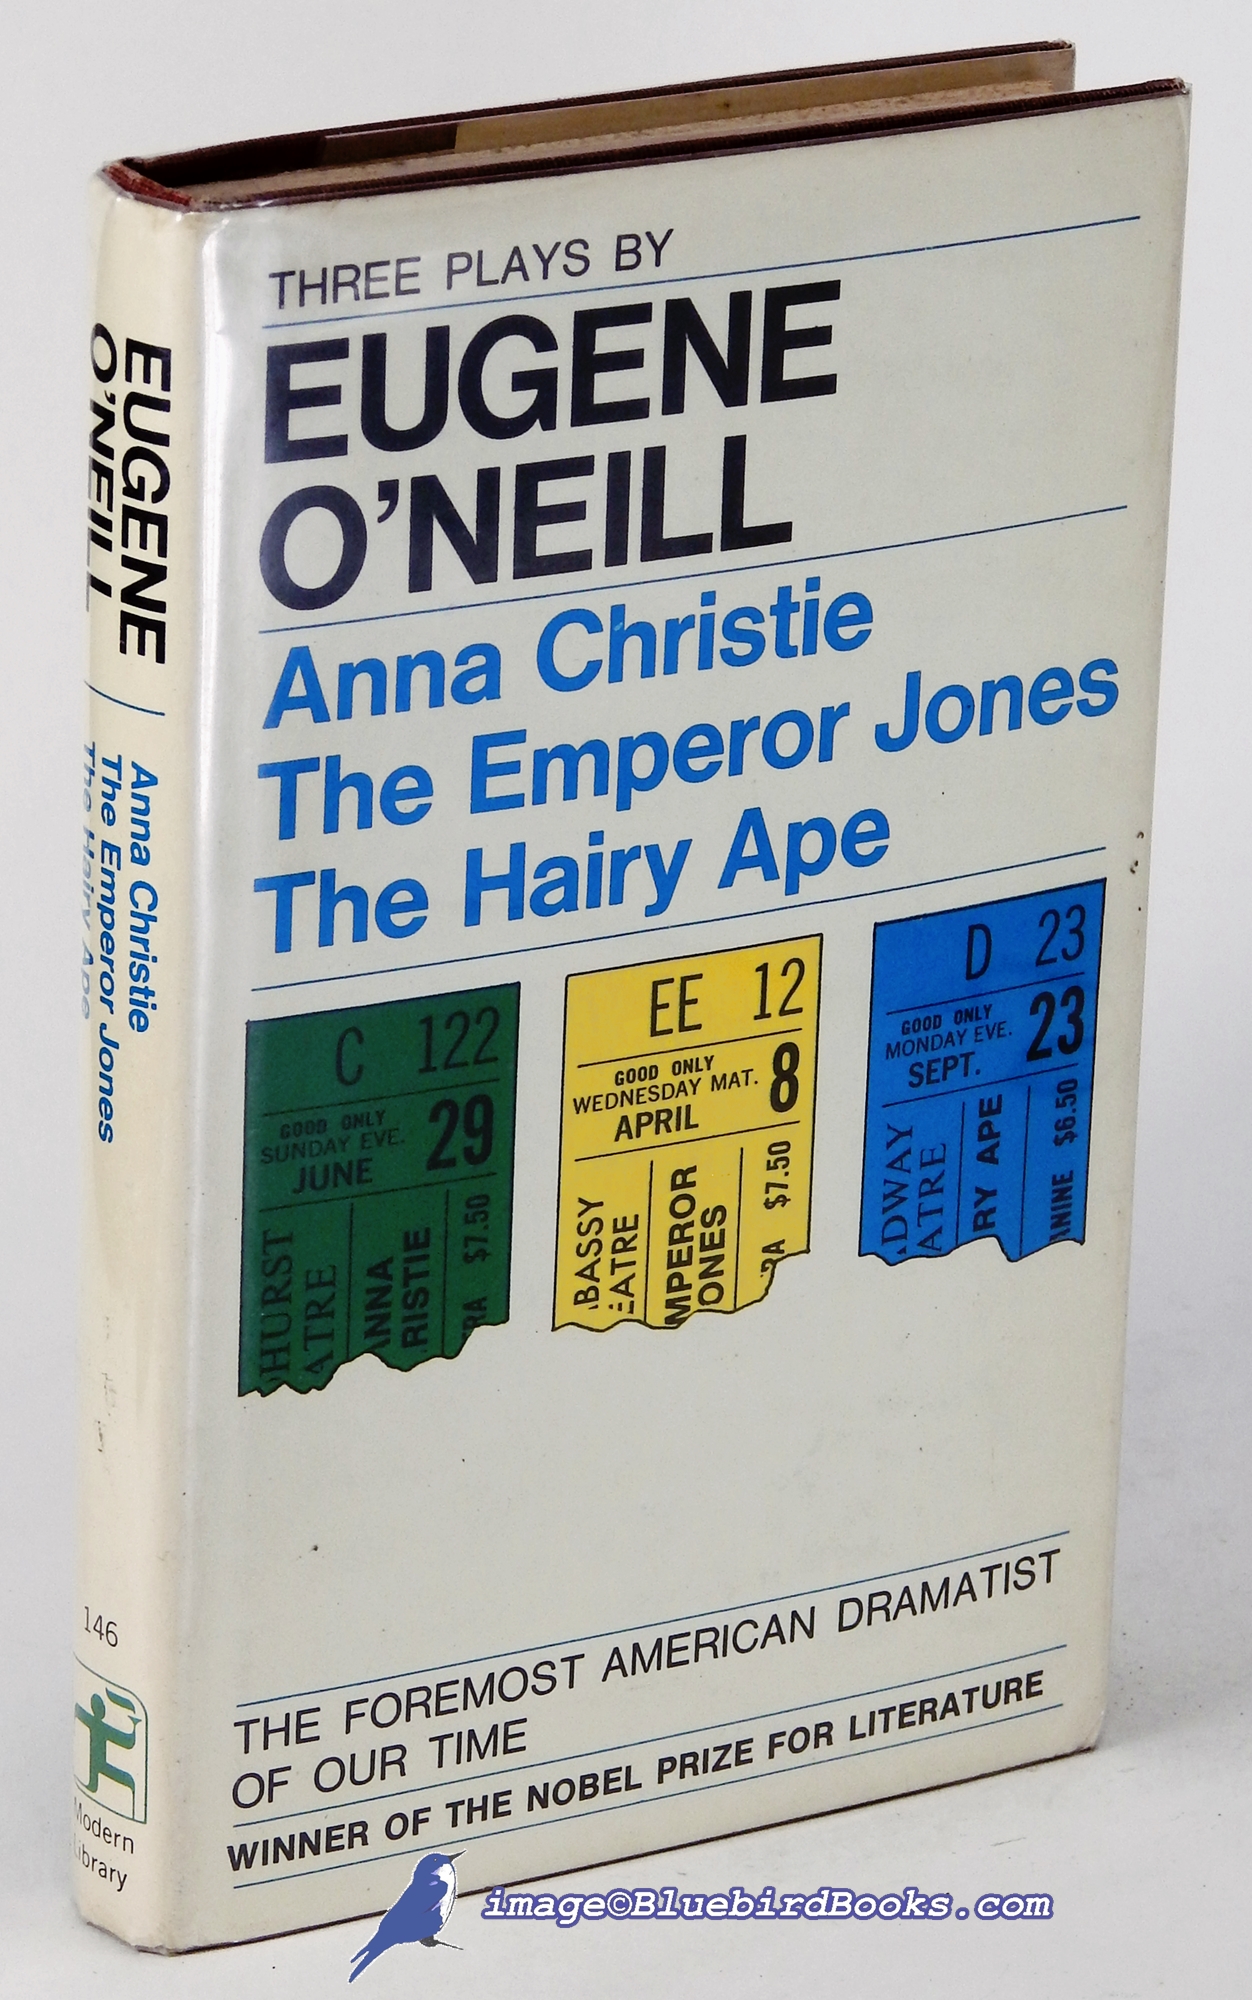 O'NEILL, EUGENE - Three Plays: Anna Christie, the Emperor Jones, and the Hairy Ape (Modern Library #146. 2)